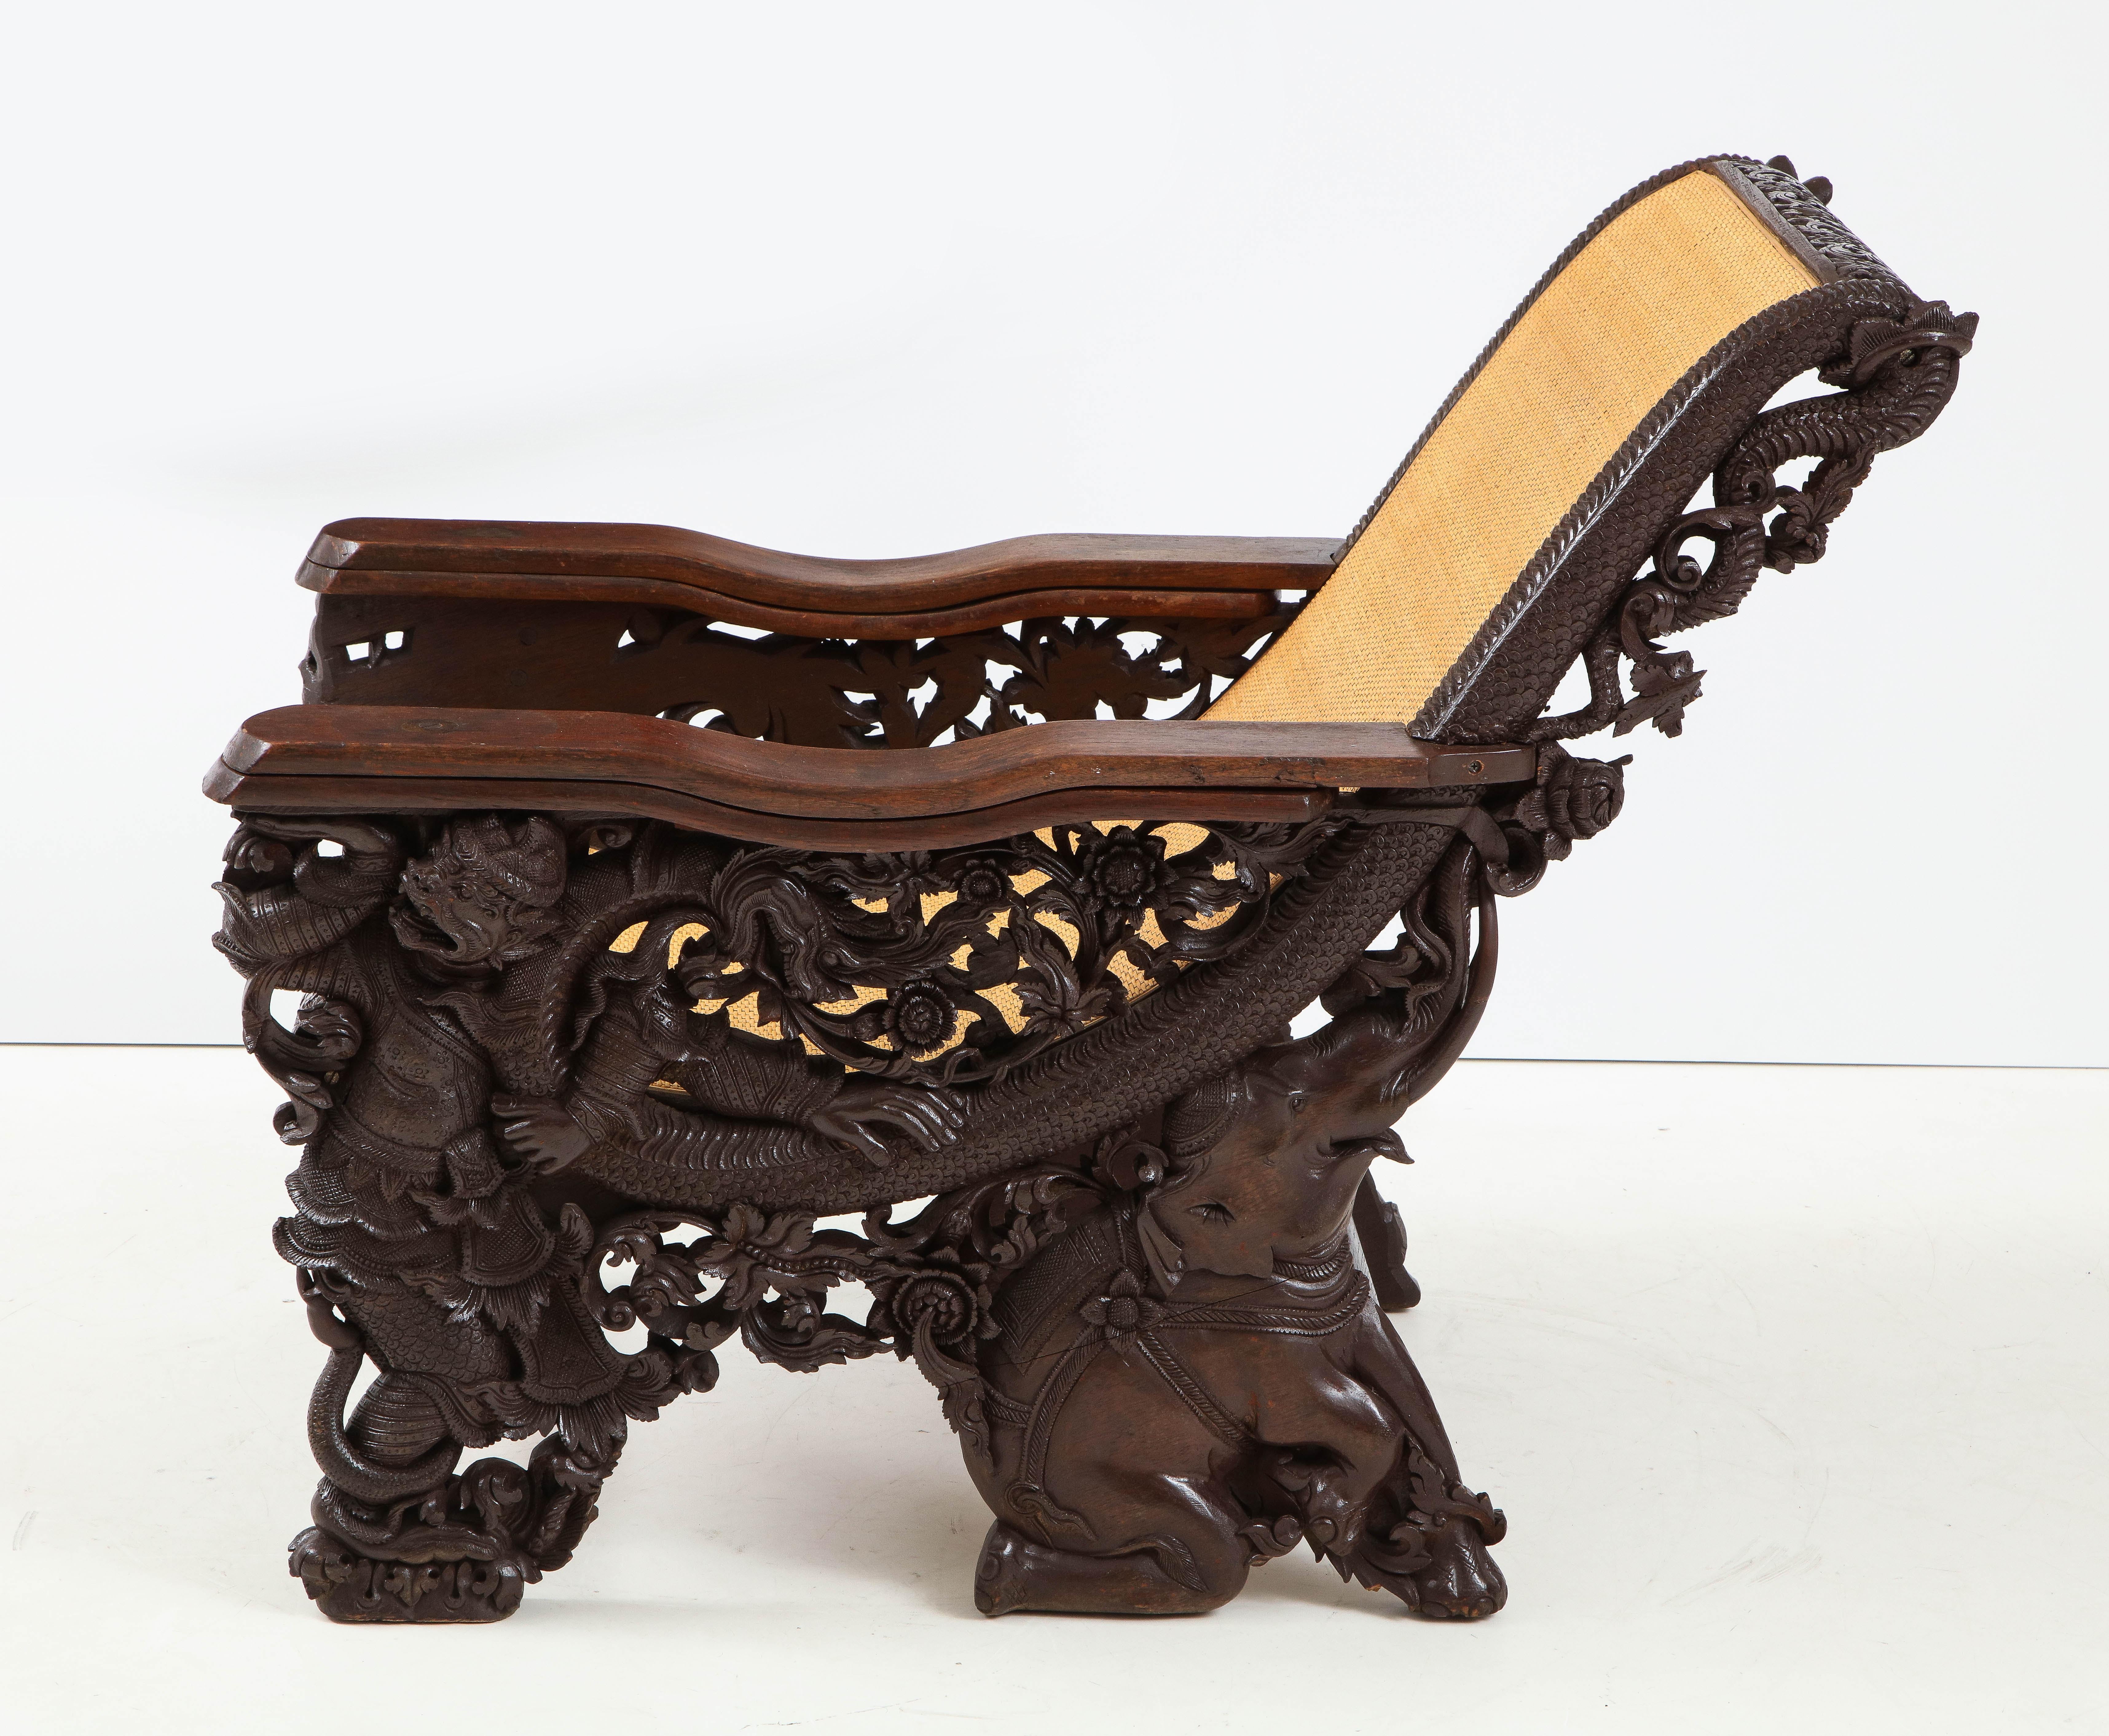 Exquisite hand carved plantation chair featuring elephants, foliage, flowers and snake motifs. A new tightly woven grass cloth seat and back complete this masterful work of art chair.